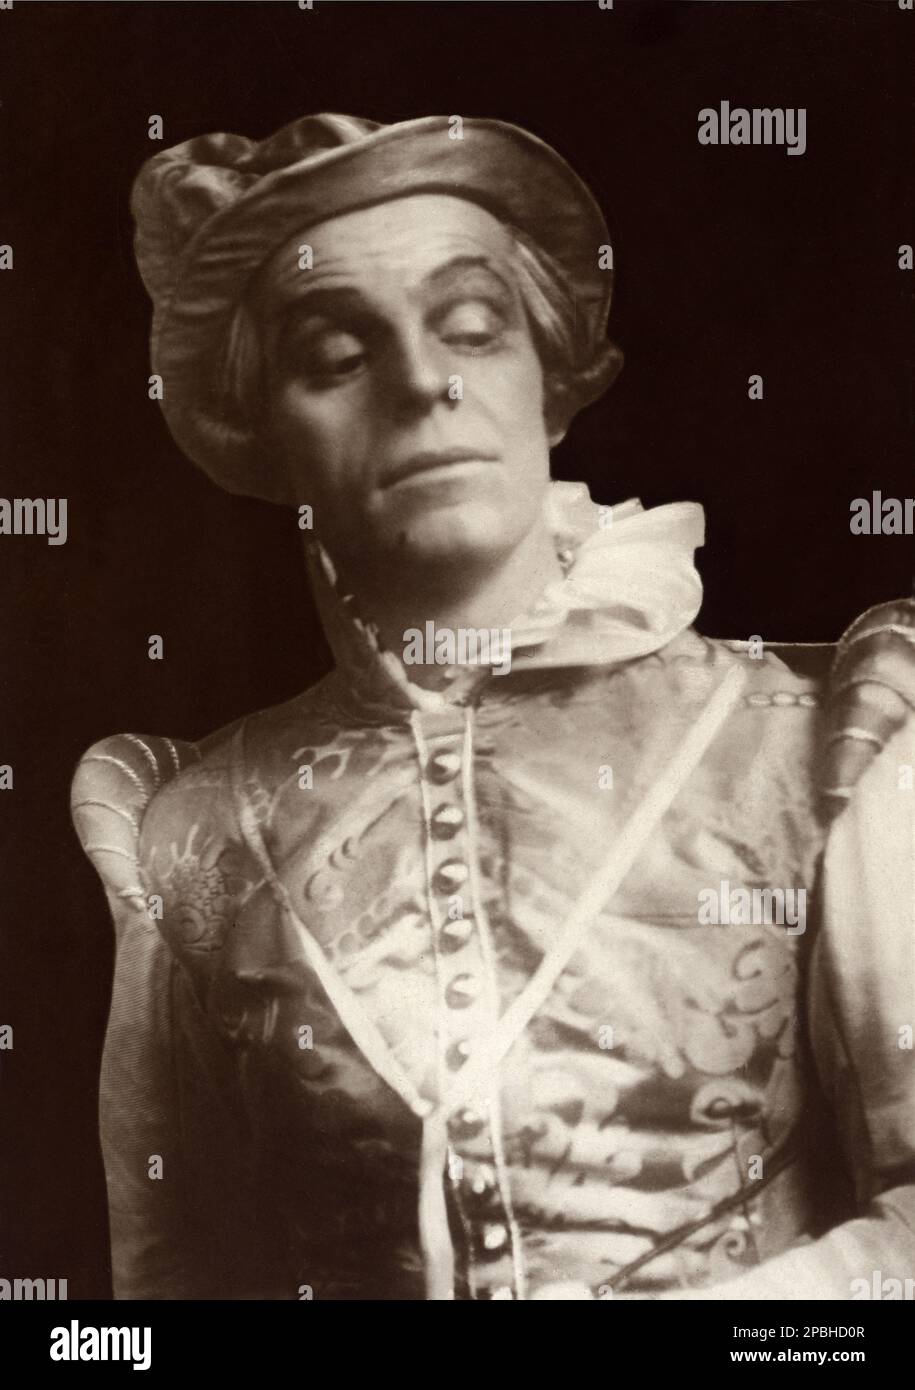 1920 ca,  Berlin, Germany : The german-albanian theatre actor  ALEXANDER MOISSI (1879 - 1935) in  WIE ES EUCH GEFALLT ( As You Like It - Come vi pare ) by William Shakespeare . Photo by Fritz Richard , Berlin . - Alessandro Moisi - Aleksander Moisiu - TEATRO - THEATER - THEATRE - attore teatrale ----  Archivio GBB Stock Photo